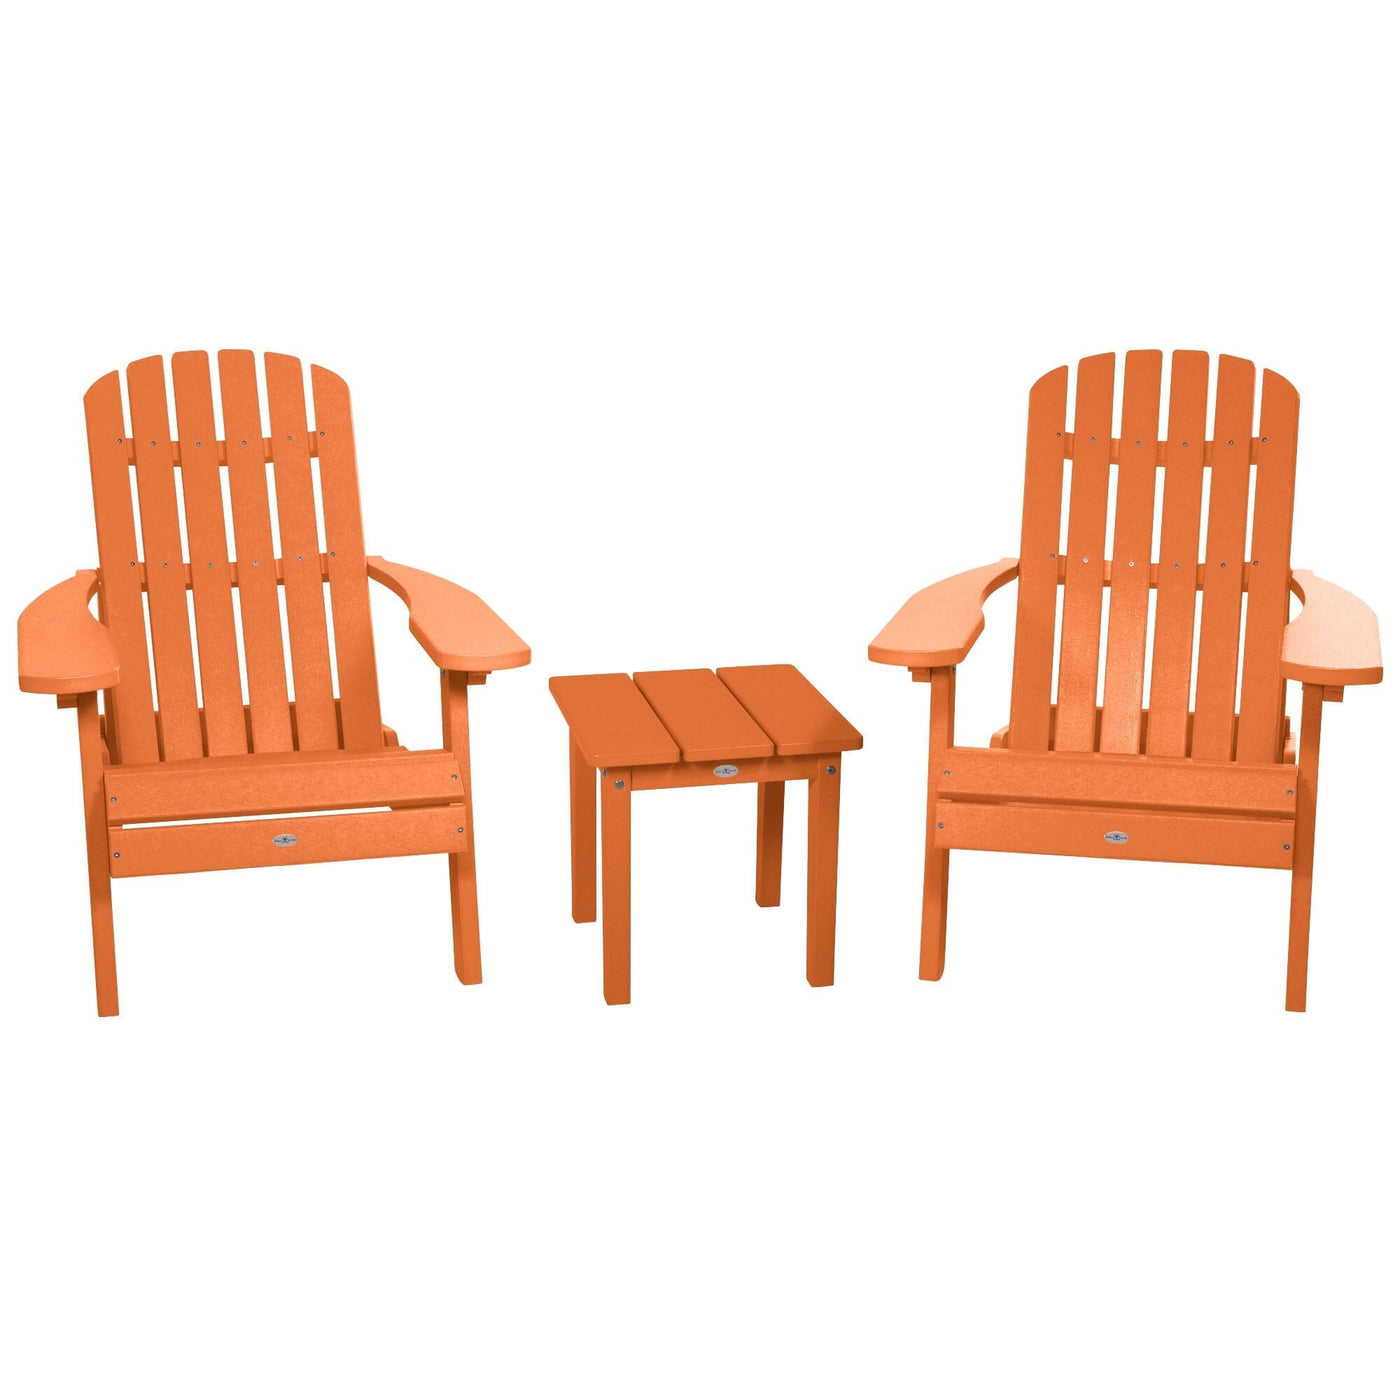 Two Cape Folding Adirondack Chairs and Side Table Set Kitted Set Bahia Verde Outdoors Citrus Orange 